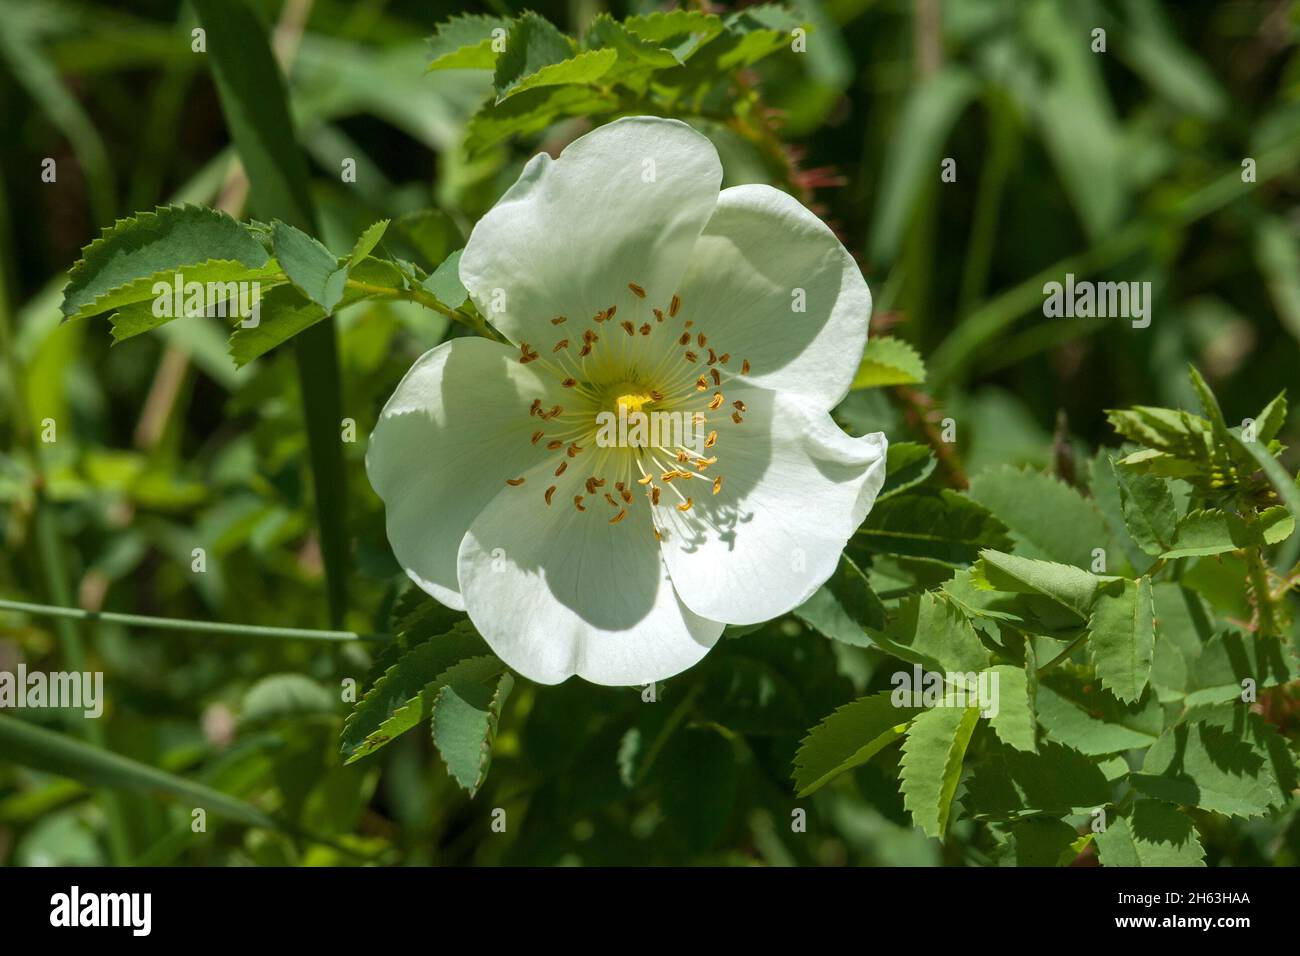 germany,baden-wuerttemberg,herrenberg,bibernell rose,rosa spinosissima,also known as rosa pimpinellifolia,german names are rock rose,dune rose,prickly rose Stock Photo